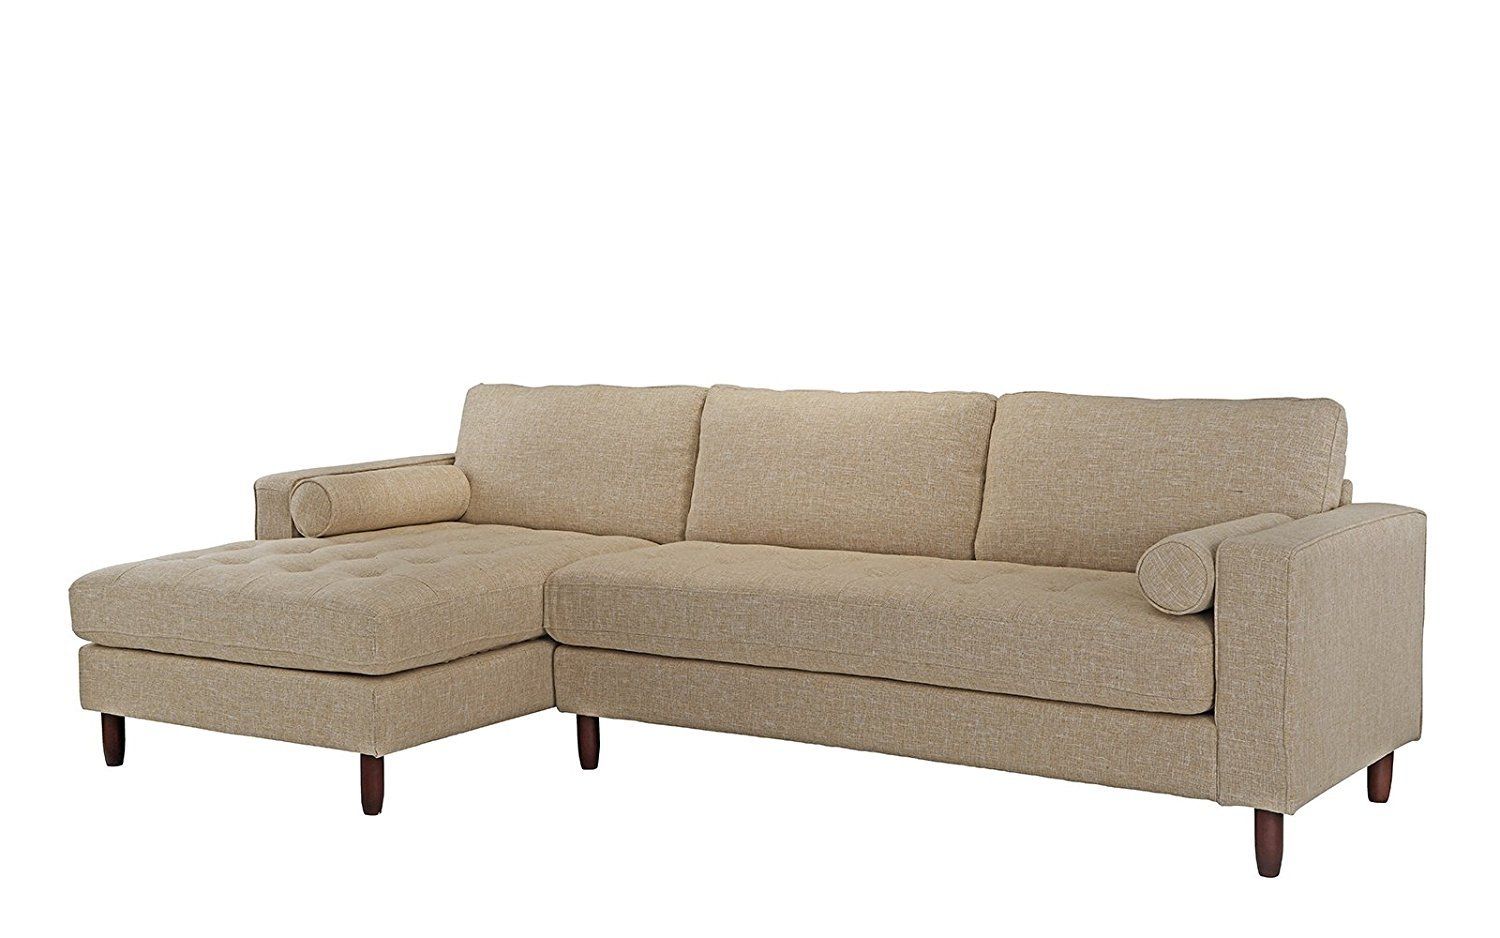 Mid Century Modern Tufted Fabric Sectional Sofa, L Shape Couch Beige In Beige L Shaped Sectional Sofas (View 9 of 20)